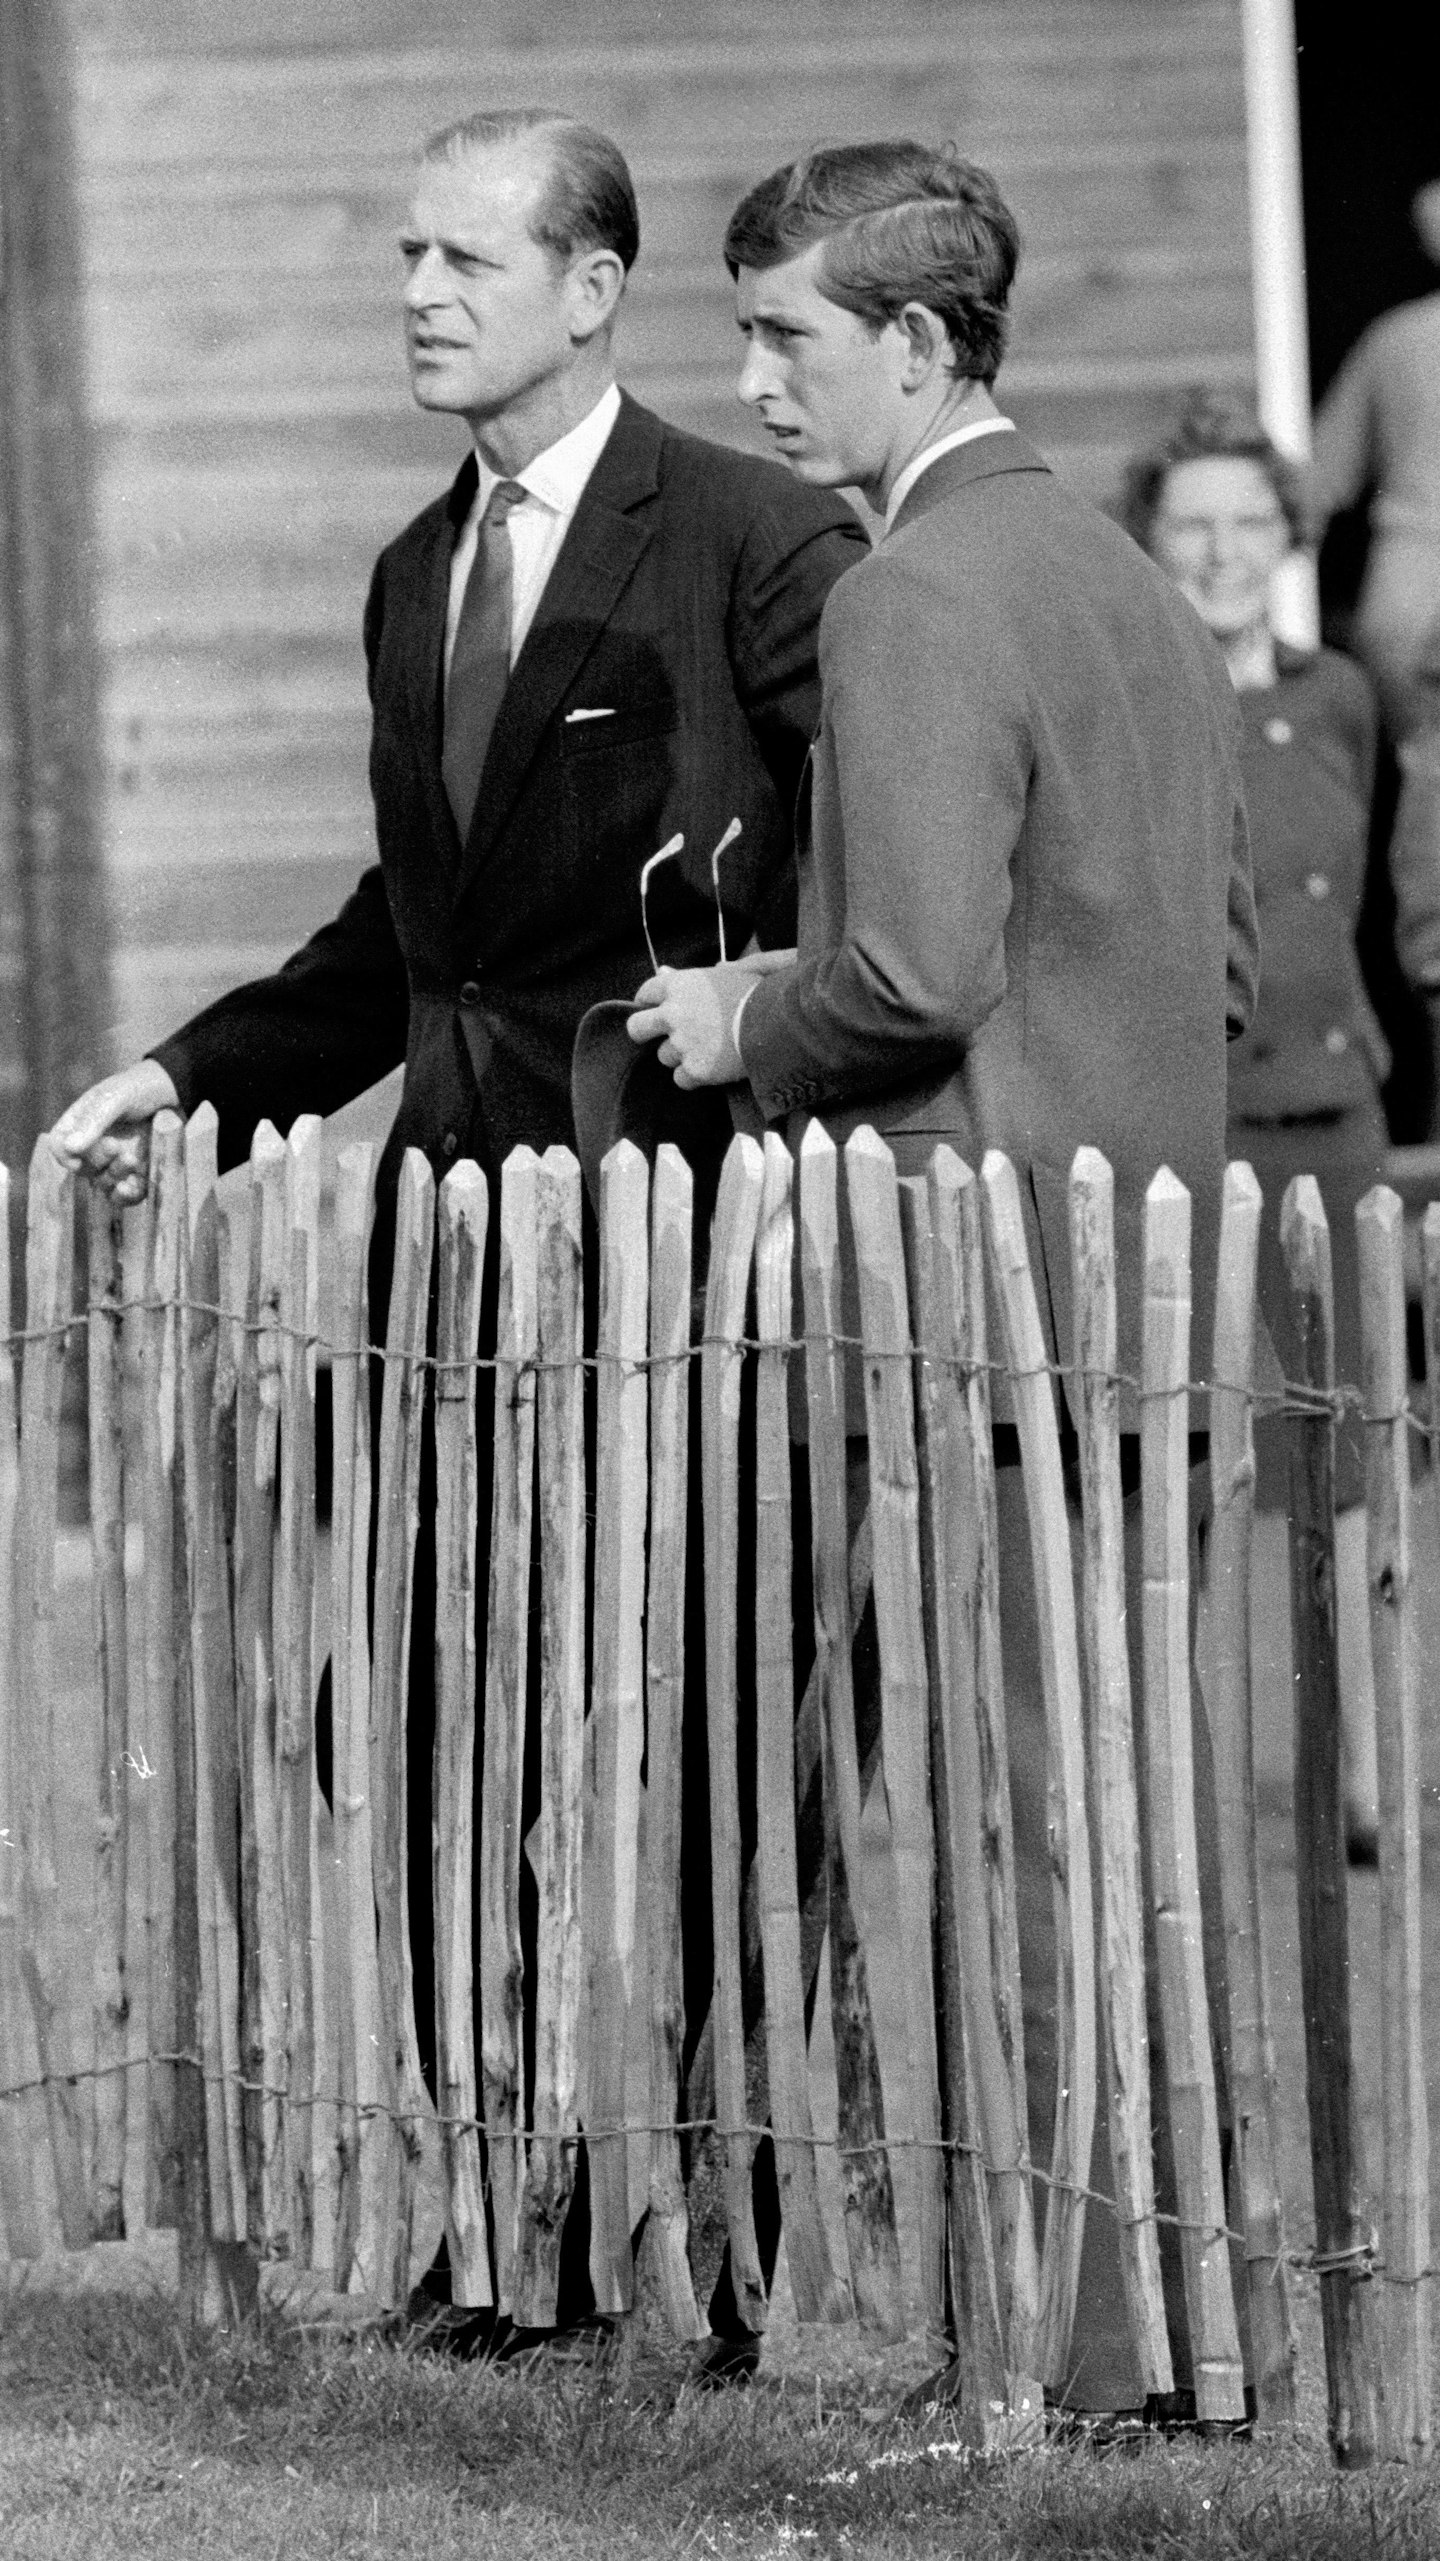 Prince Charles (then aged 19yrs) and his father Prince Philip,